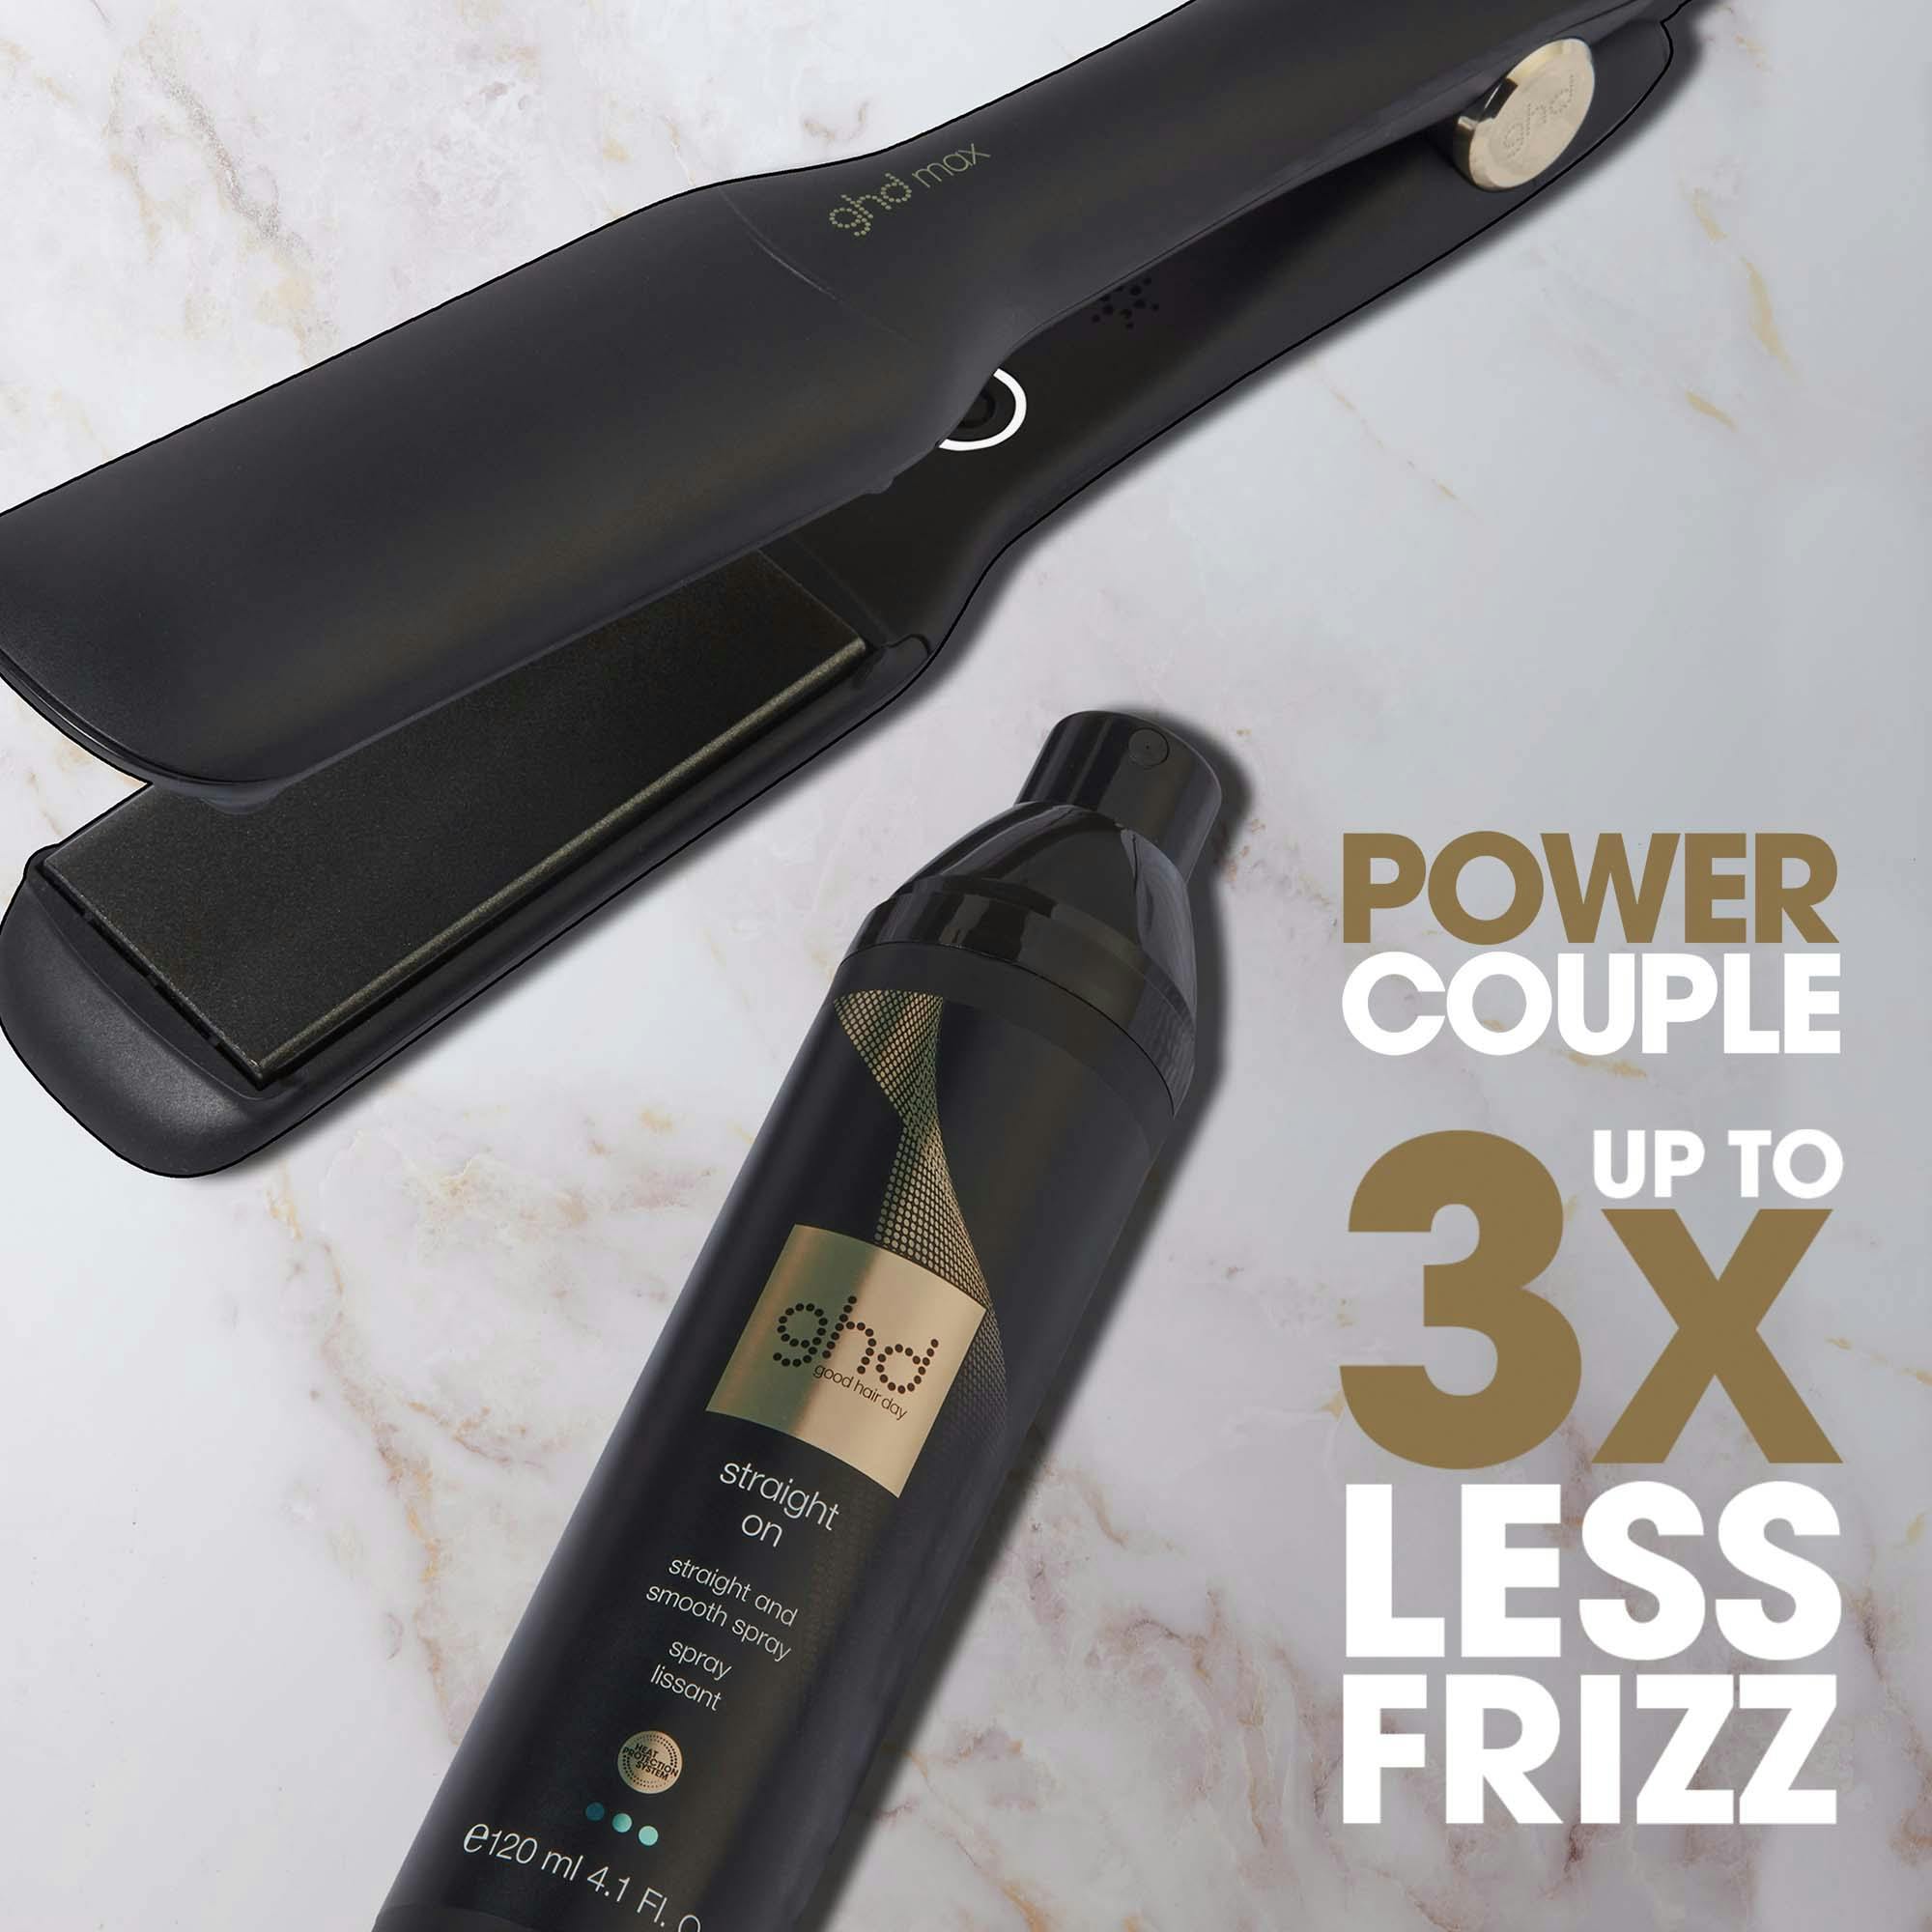 ghd Straight On Straight & Smooth Spray 120ml Smoothing Heat Protection